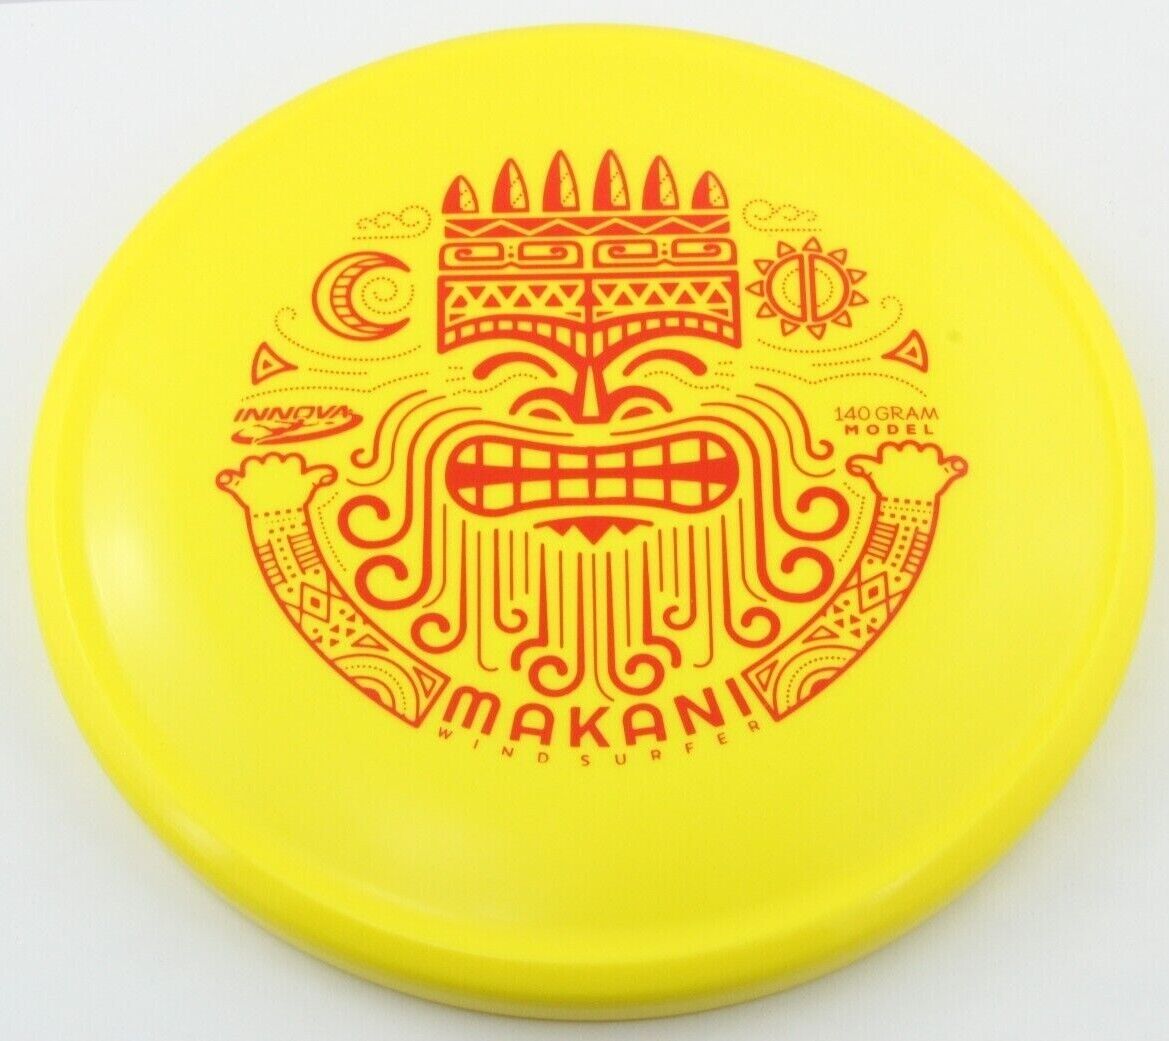 NEW Dx Makani 142g Yellow Putter/Specialty Innova Disc Golf at Celestial Discs